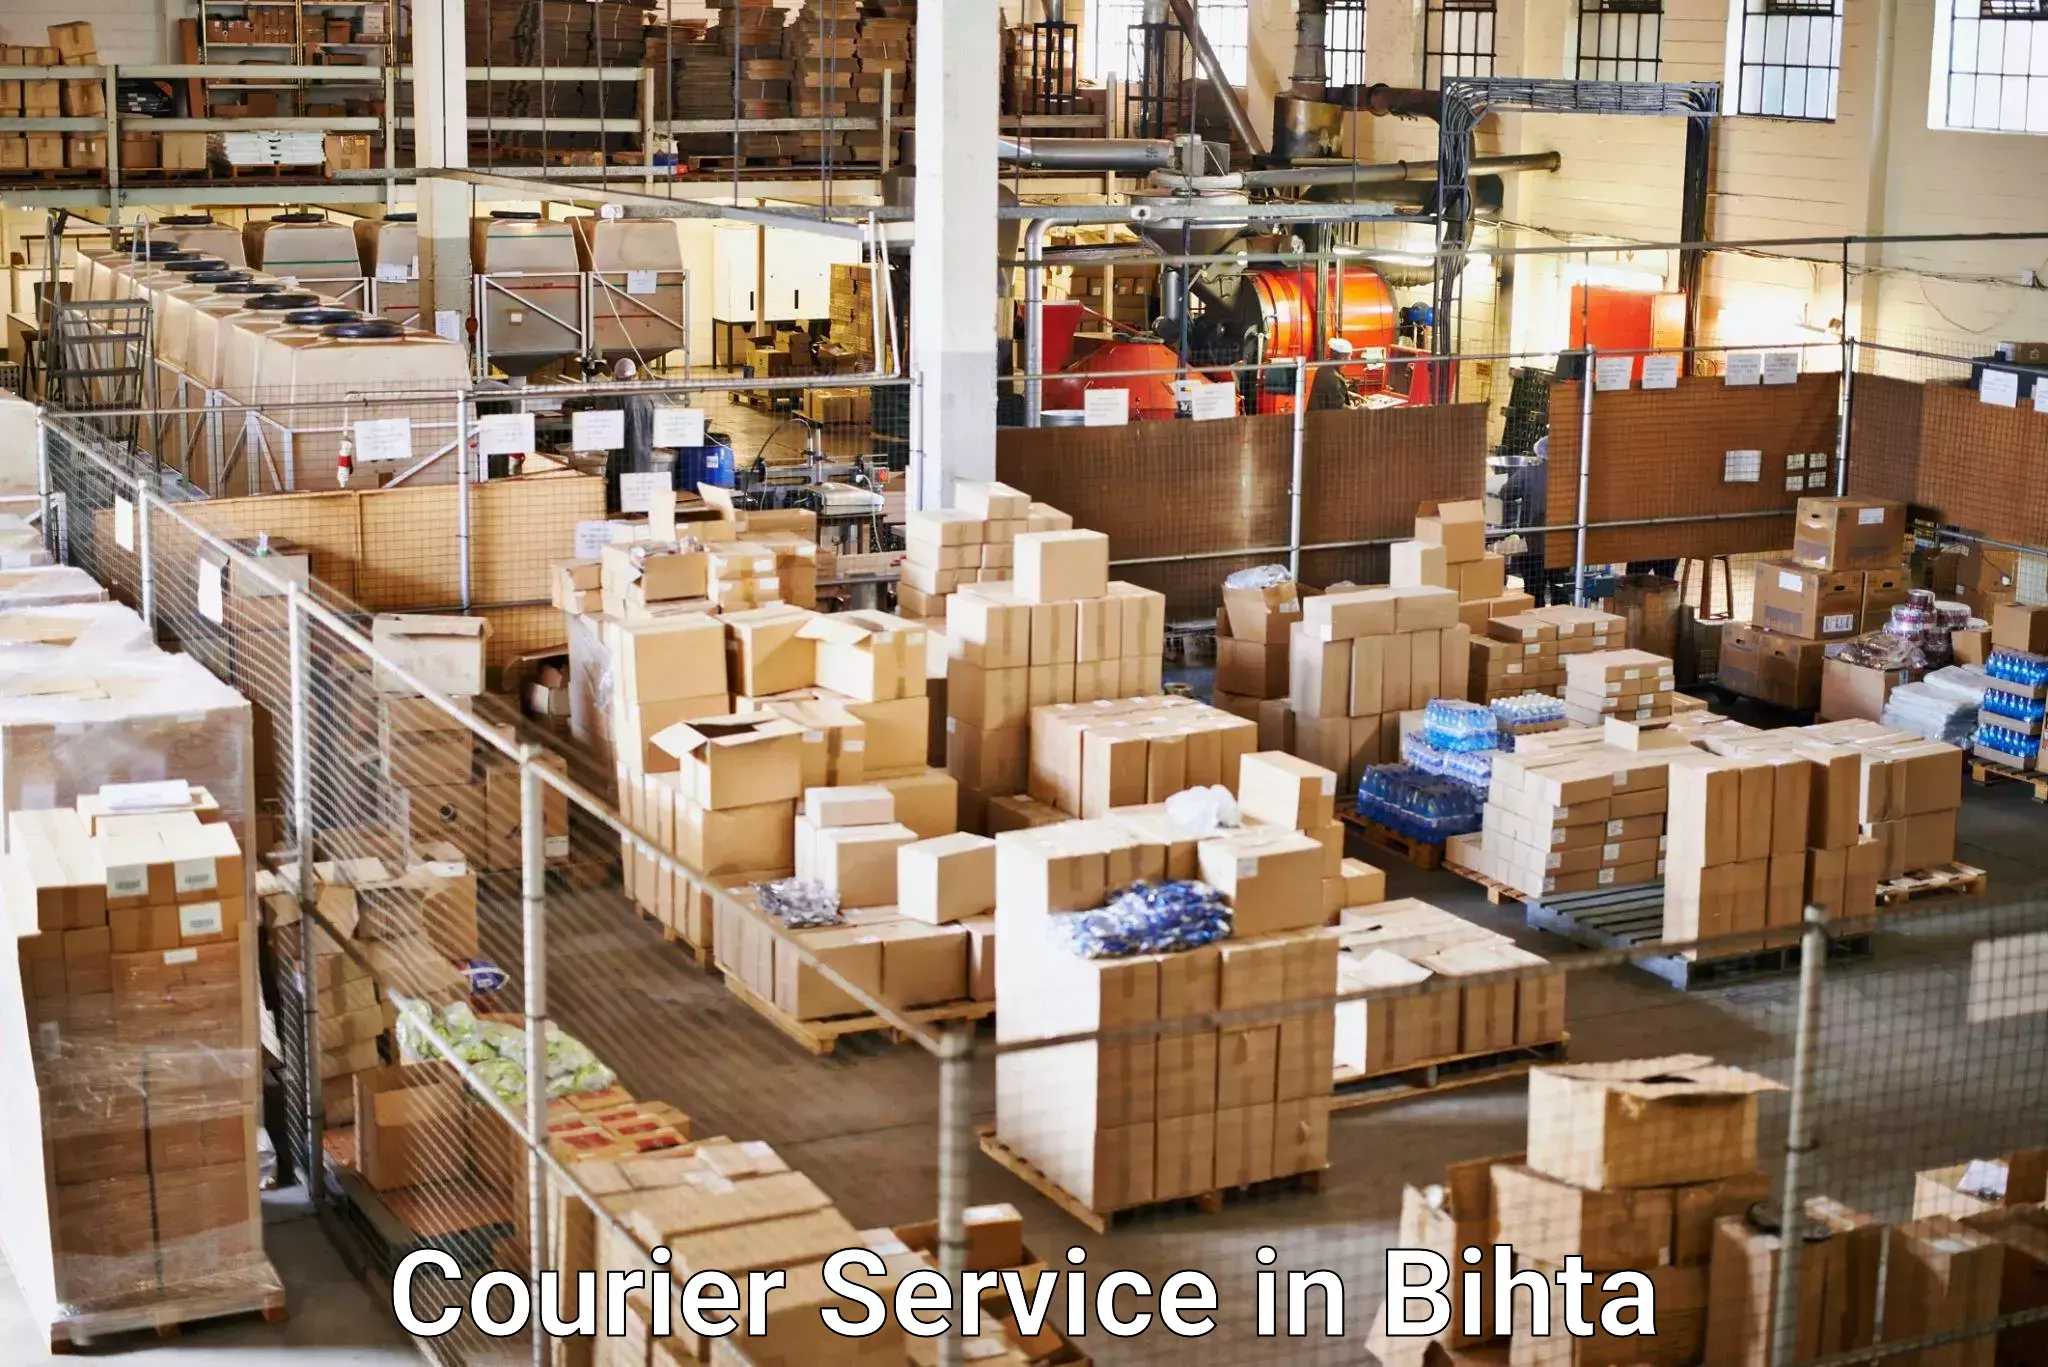 High-speed delivery in Bihta